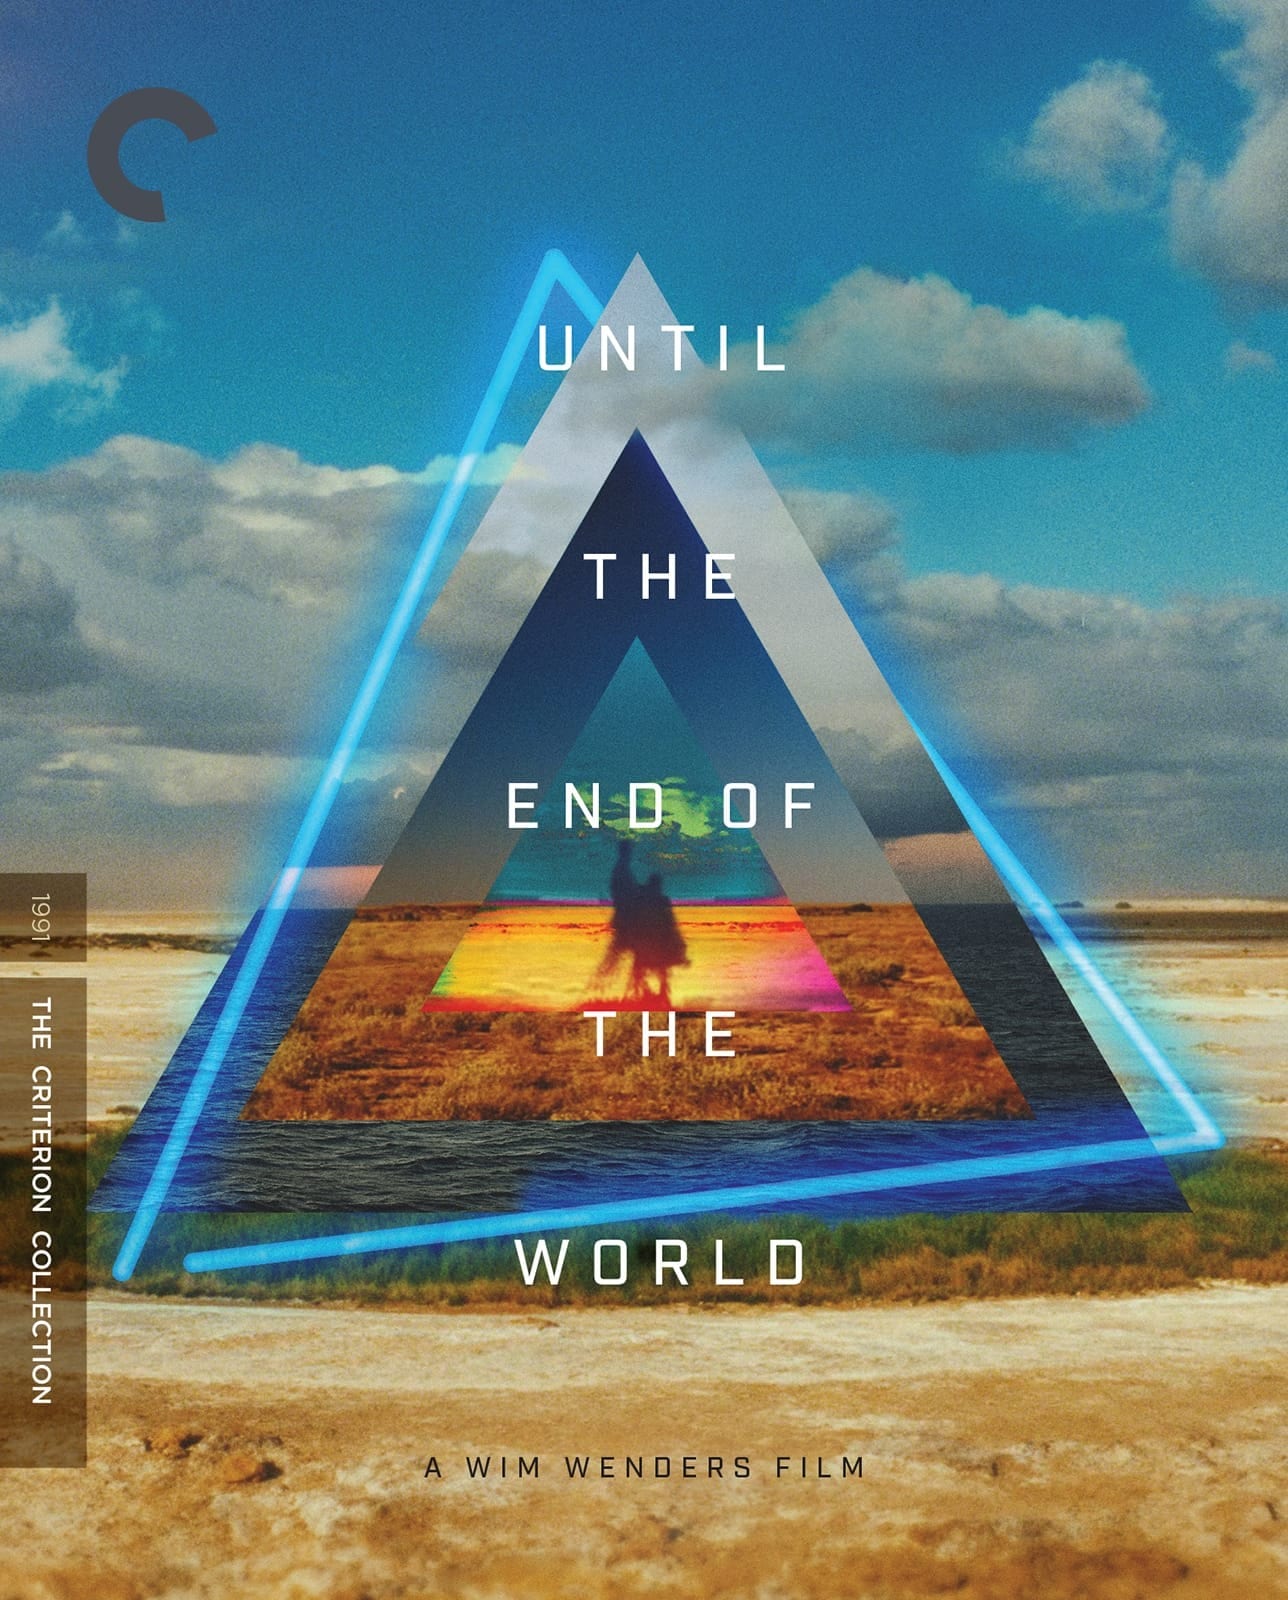 Criterion Collection's Cover of Until the End of the World